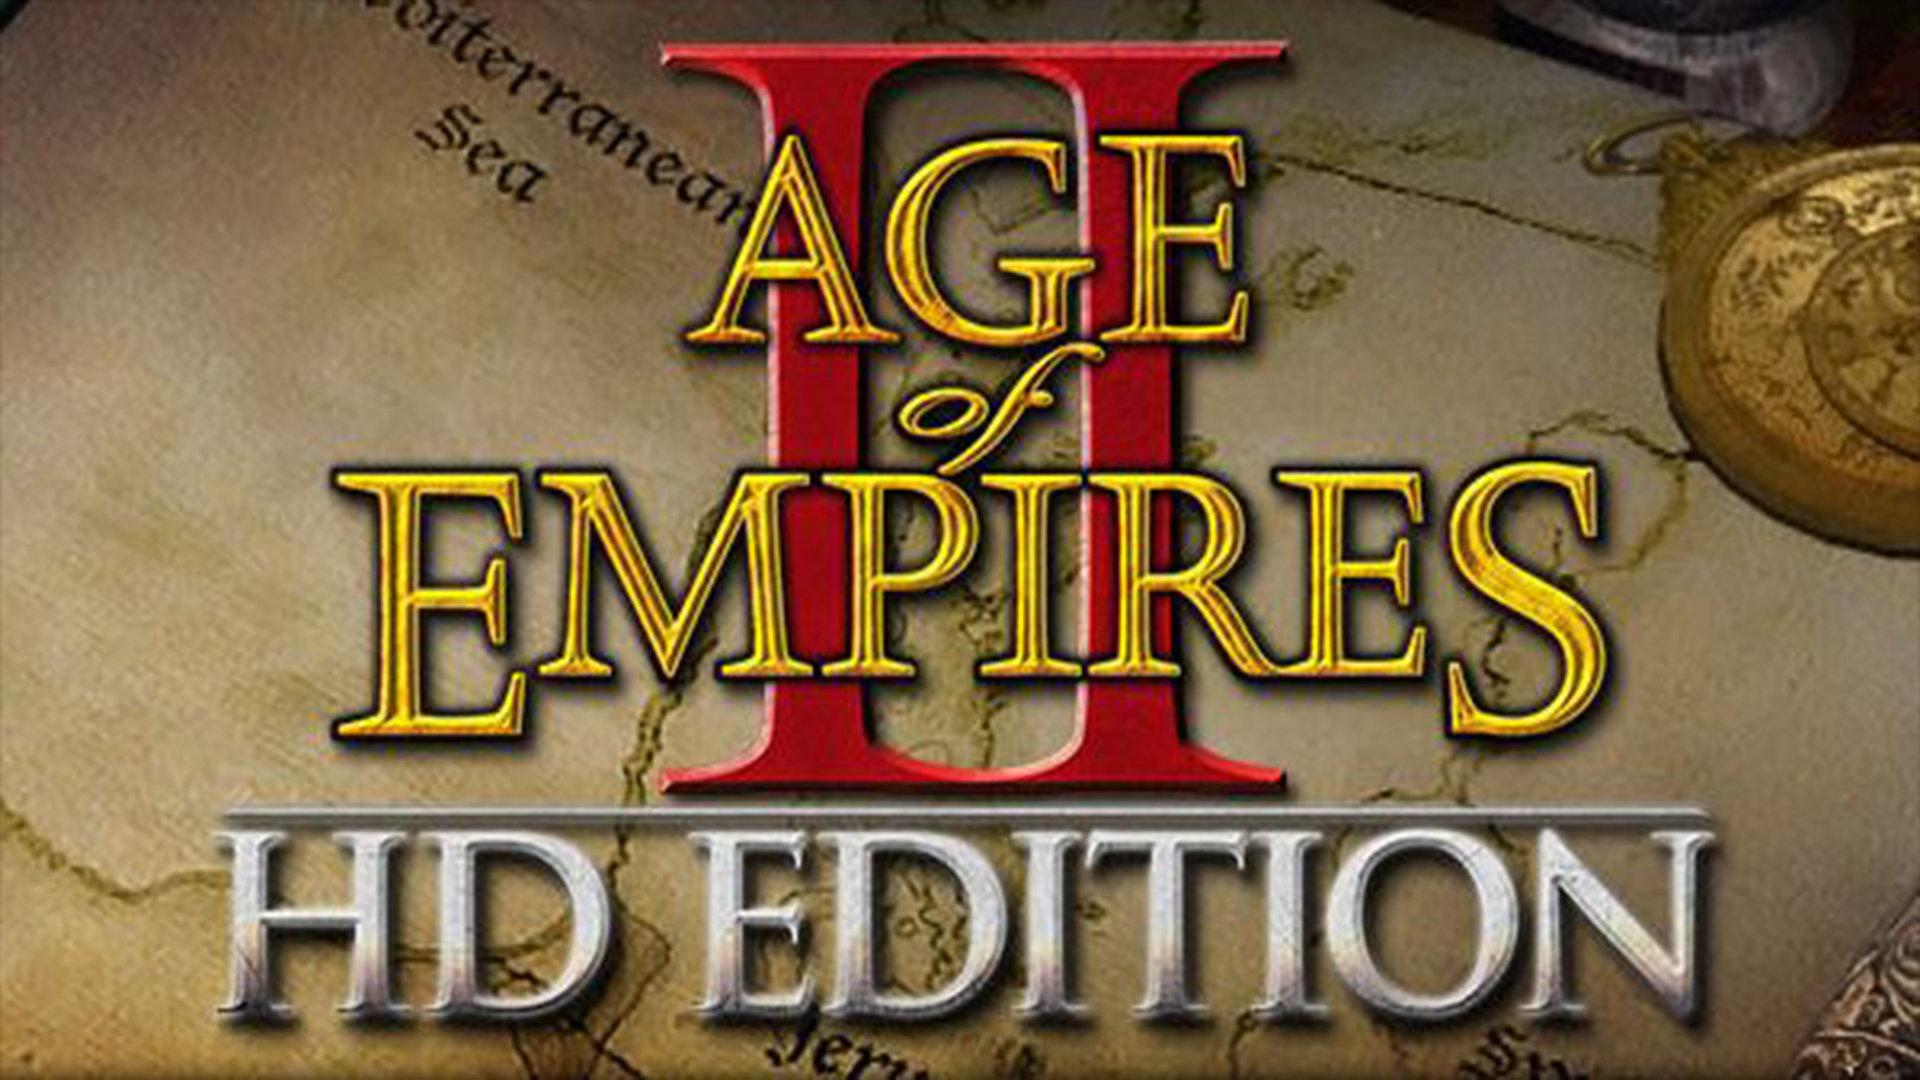 Best Age Of Empires 2 wallpaper ID:47279 for High Resolution hd 1920x1080 computer